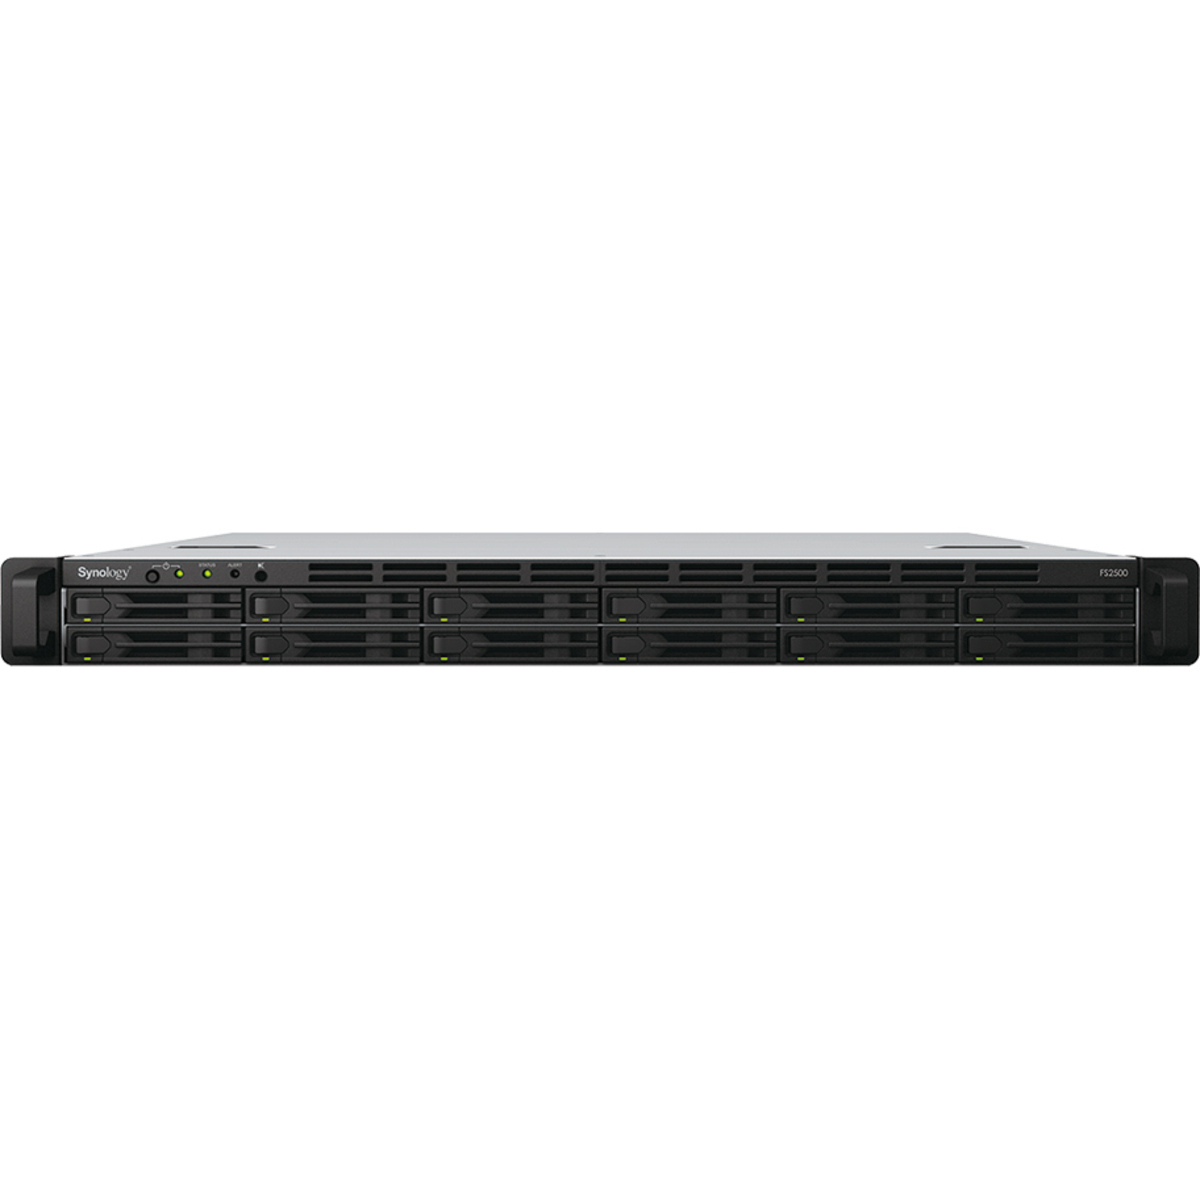 Synology FlashStation FS2500 5.5tb 12-Bay RackMount Large Business / Enterprise NAS - Network Attached Storage Device 11x500gb Crucial MX500 CT500MX500SSD1 2.5 560/510MB/s SATA 6Gb/s SSD CONSUMER Class Drives Installed - Burn-In Tested - FREE RAM UPGRADE FlashStation FS2500